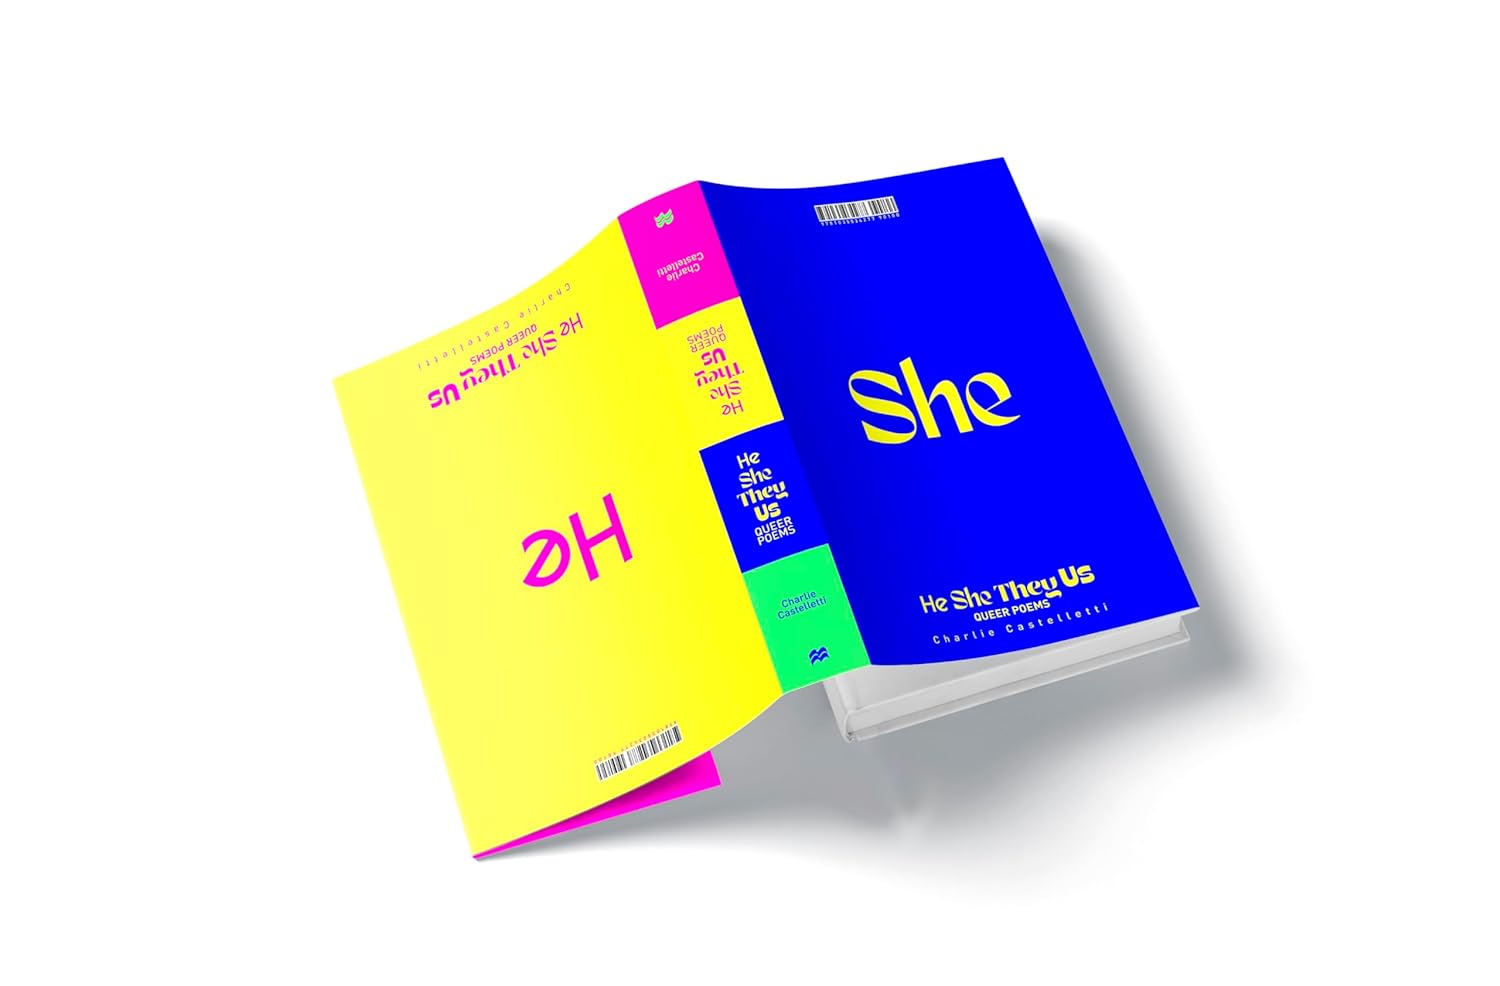 The hardback book He, She, They, Us has a reversible cover. One side of the cover is a dark blue with the pronoun "She" written in bold yellow text, while the other side has a bold yellow background with the pronoun "He" written in bright pink.